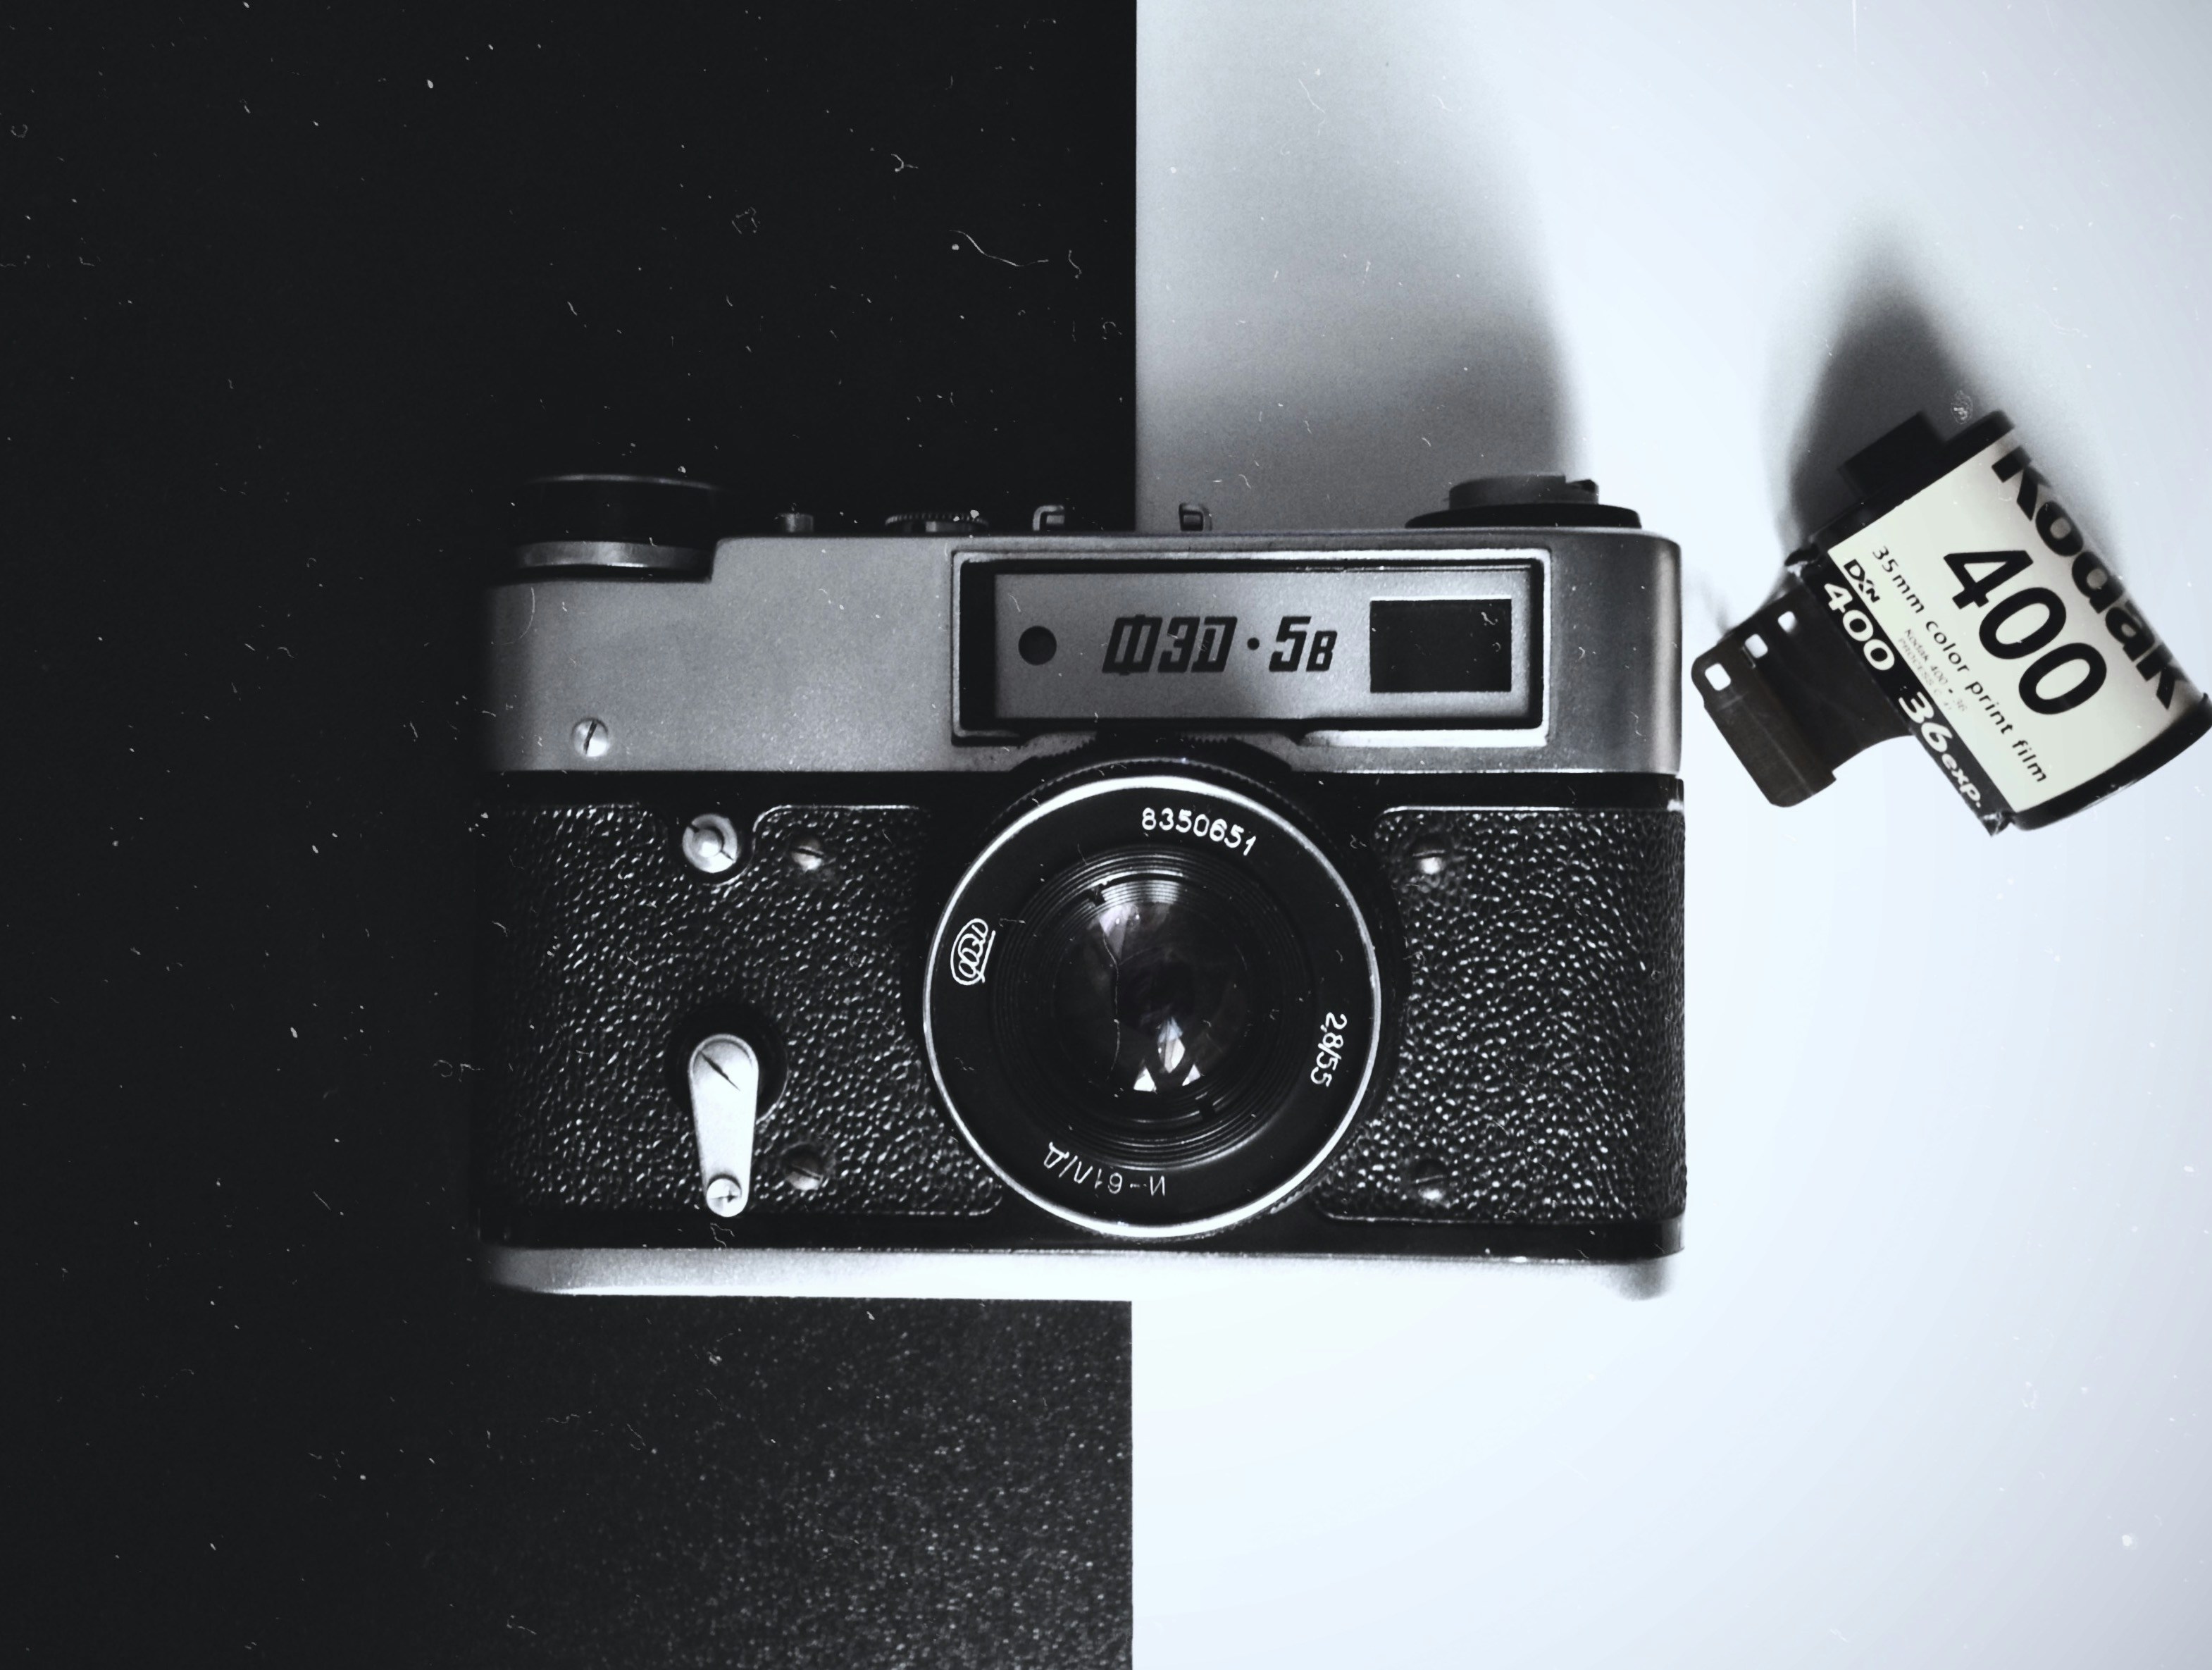 This camera was a surprise for me, I found it from my parents, and did not understand how it works. It’s such a vintage and something completely new to me. Now I’m beginning to understand how it works and I have many plans, the film always gets more mysterious and lively footage.